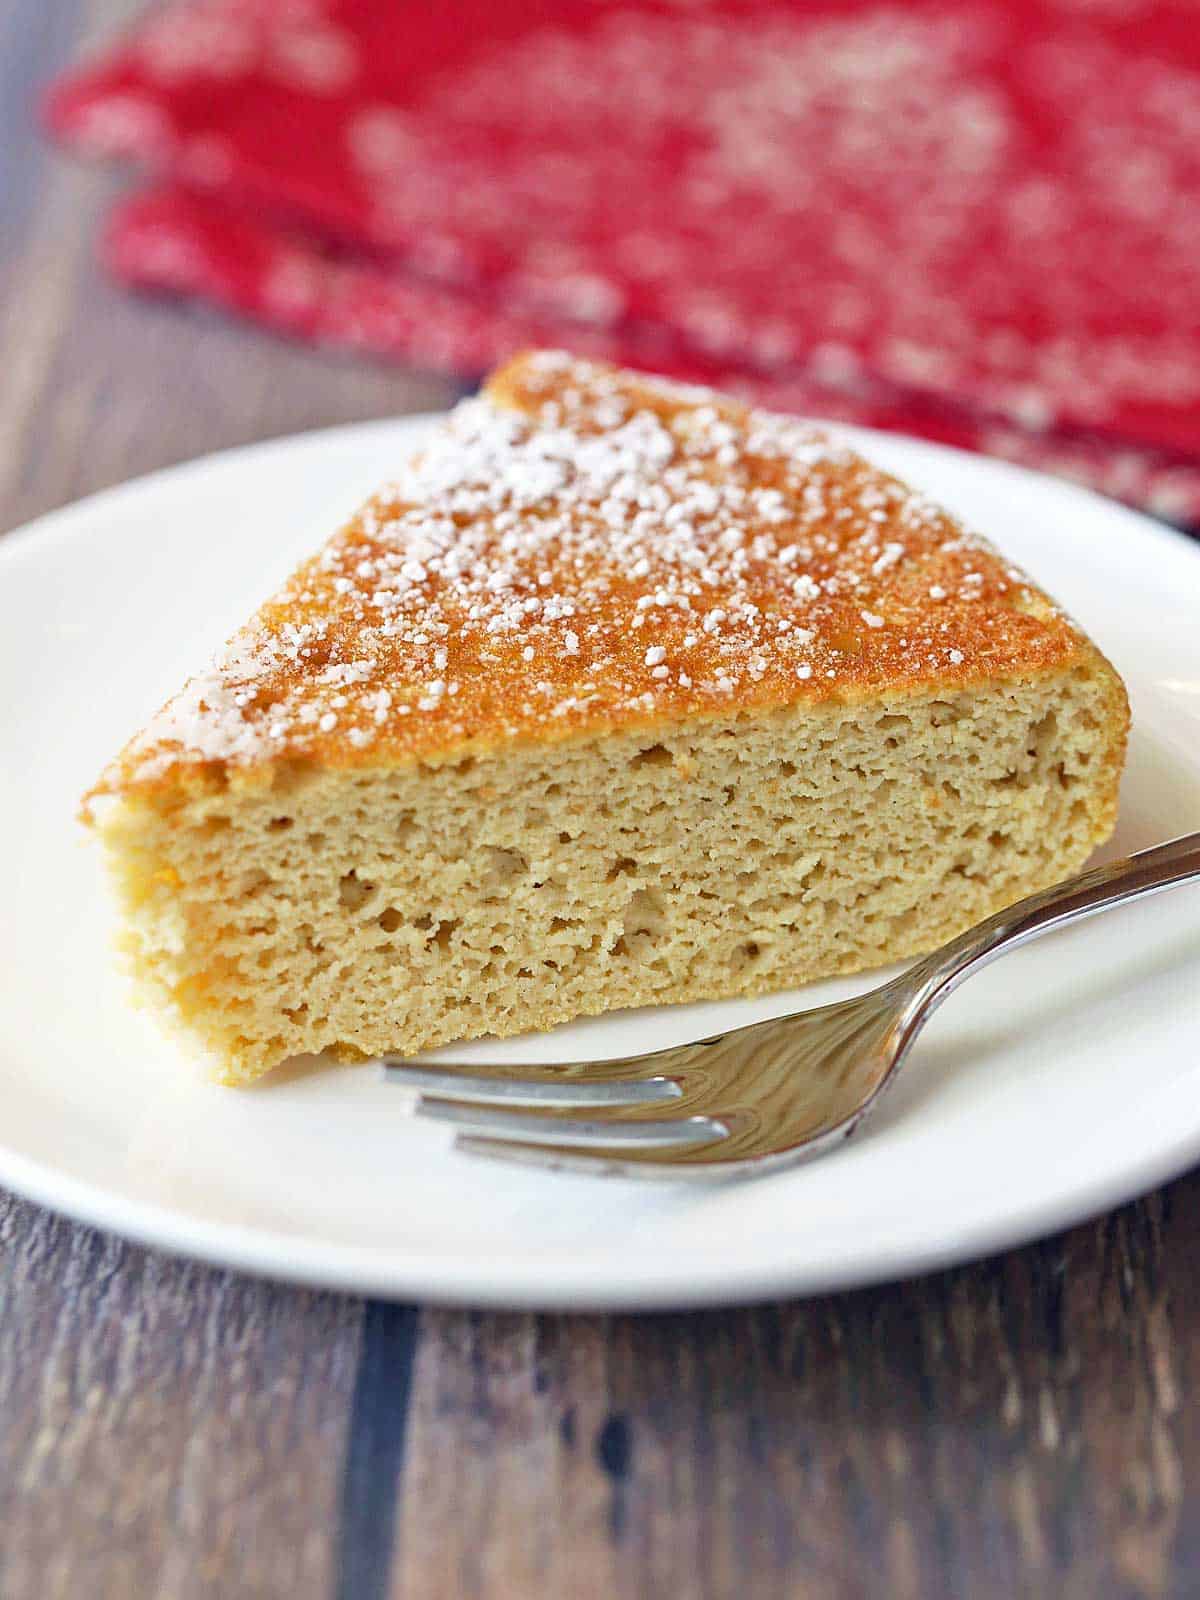 Coconut flour cake served on a plate with a fork.